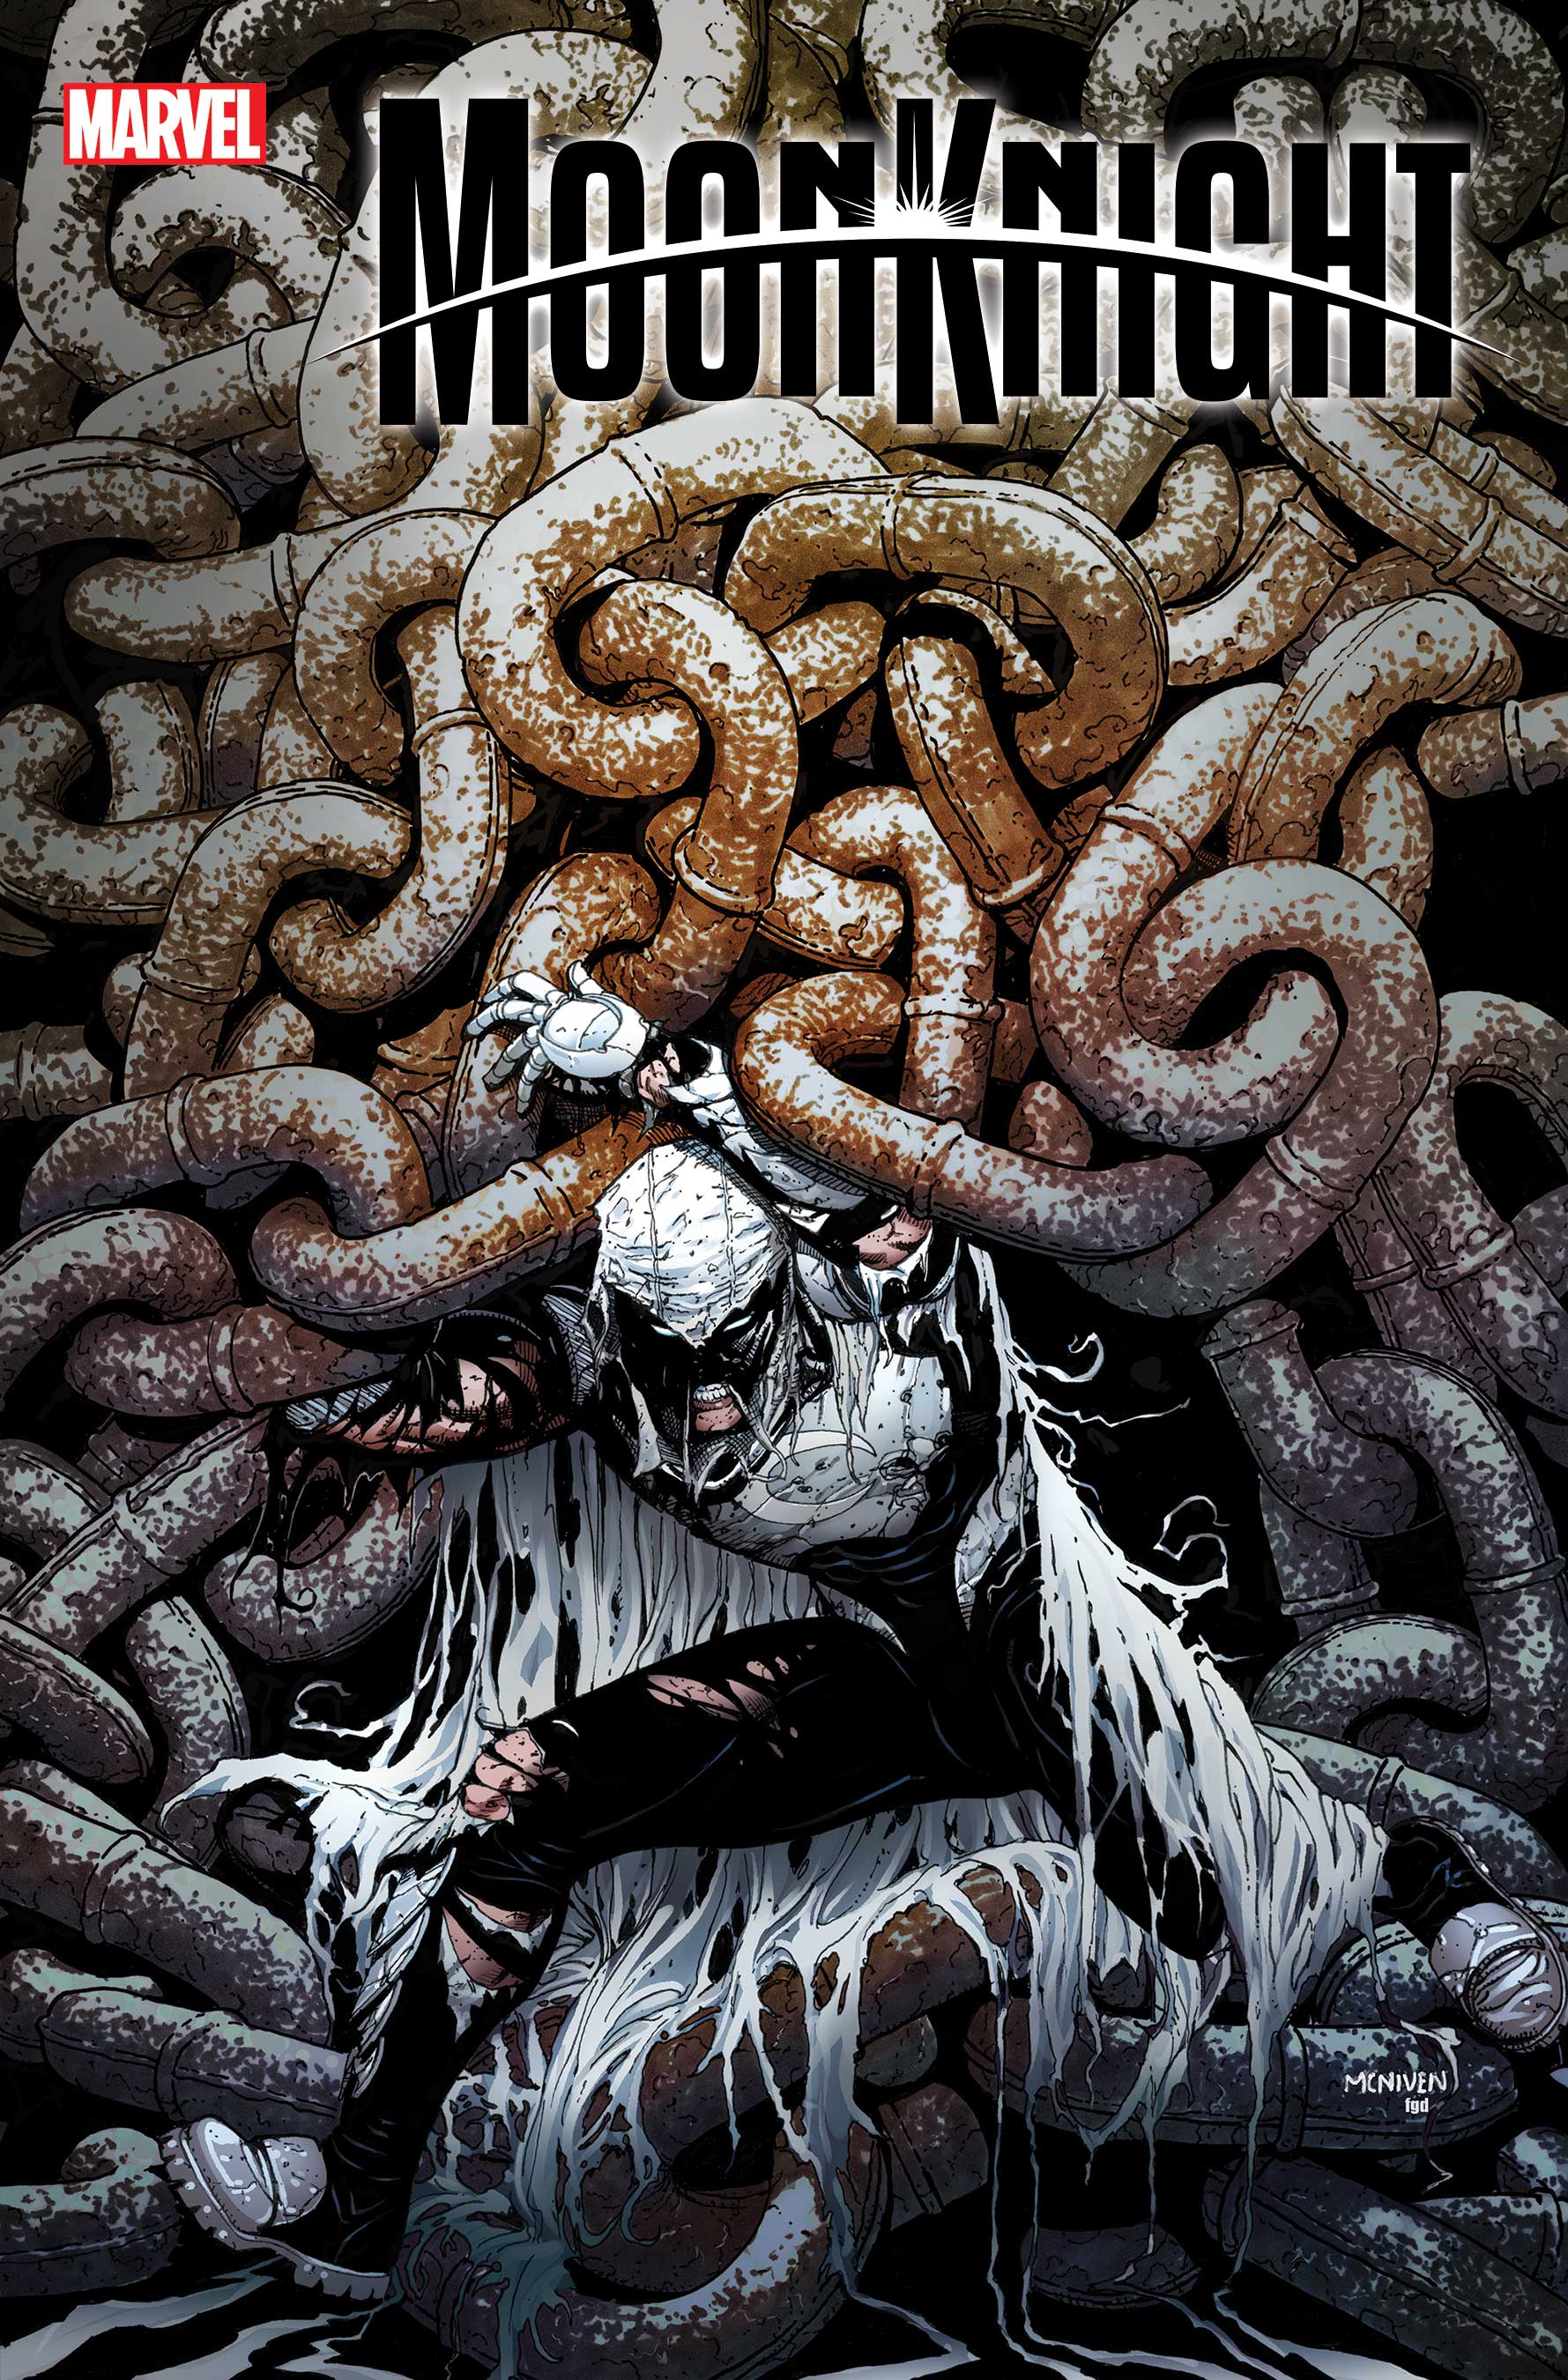 MOON KNIGHT #5 STANDARD COVER 